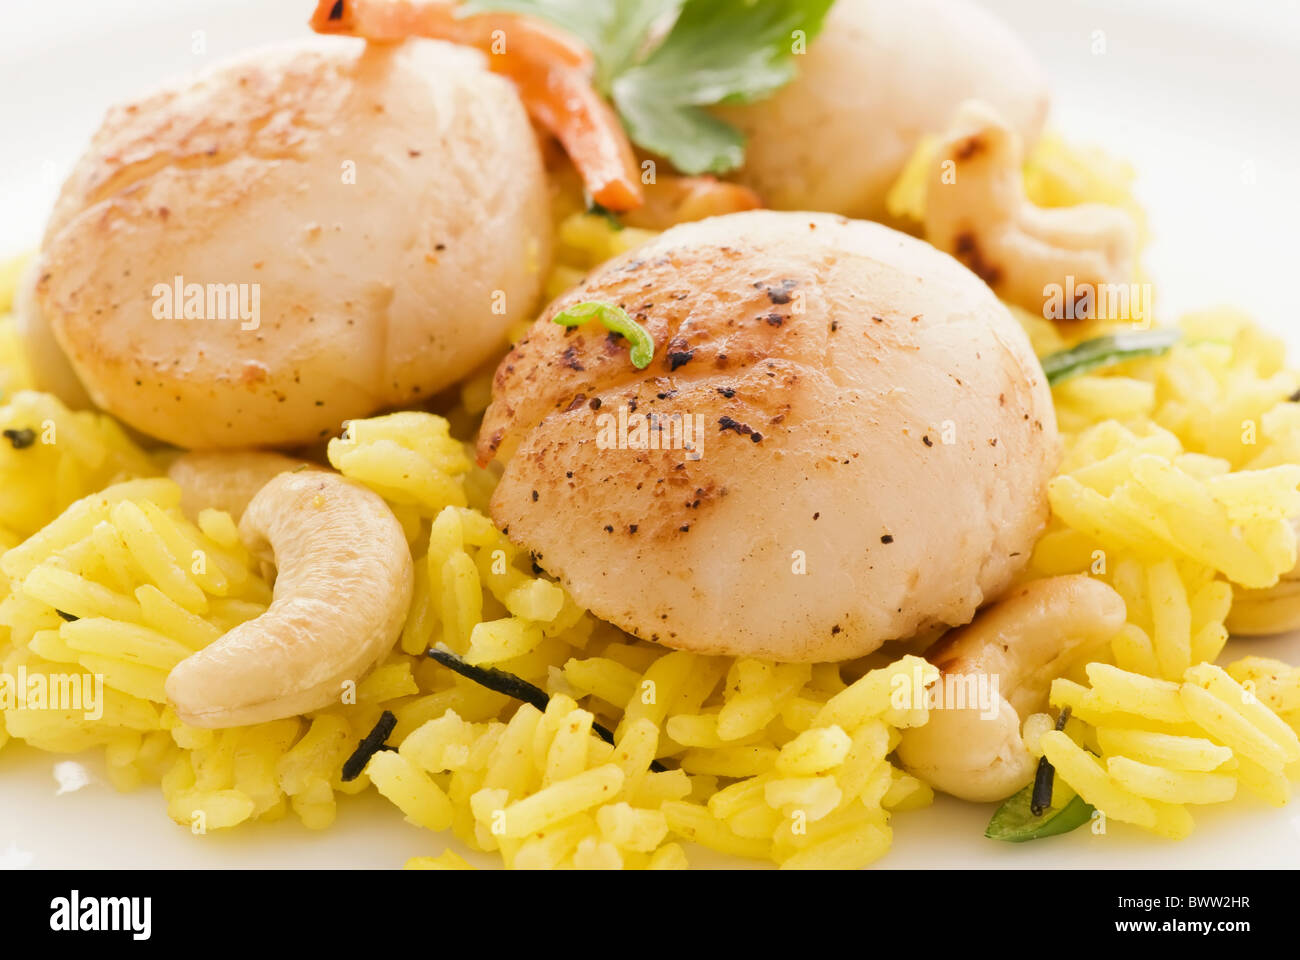 Roasted scallop with jasmine rice as closeup on a white plate Stock Photo